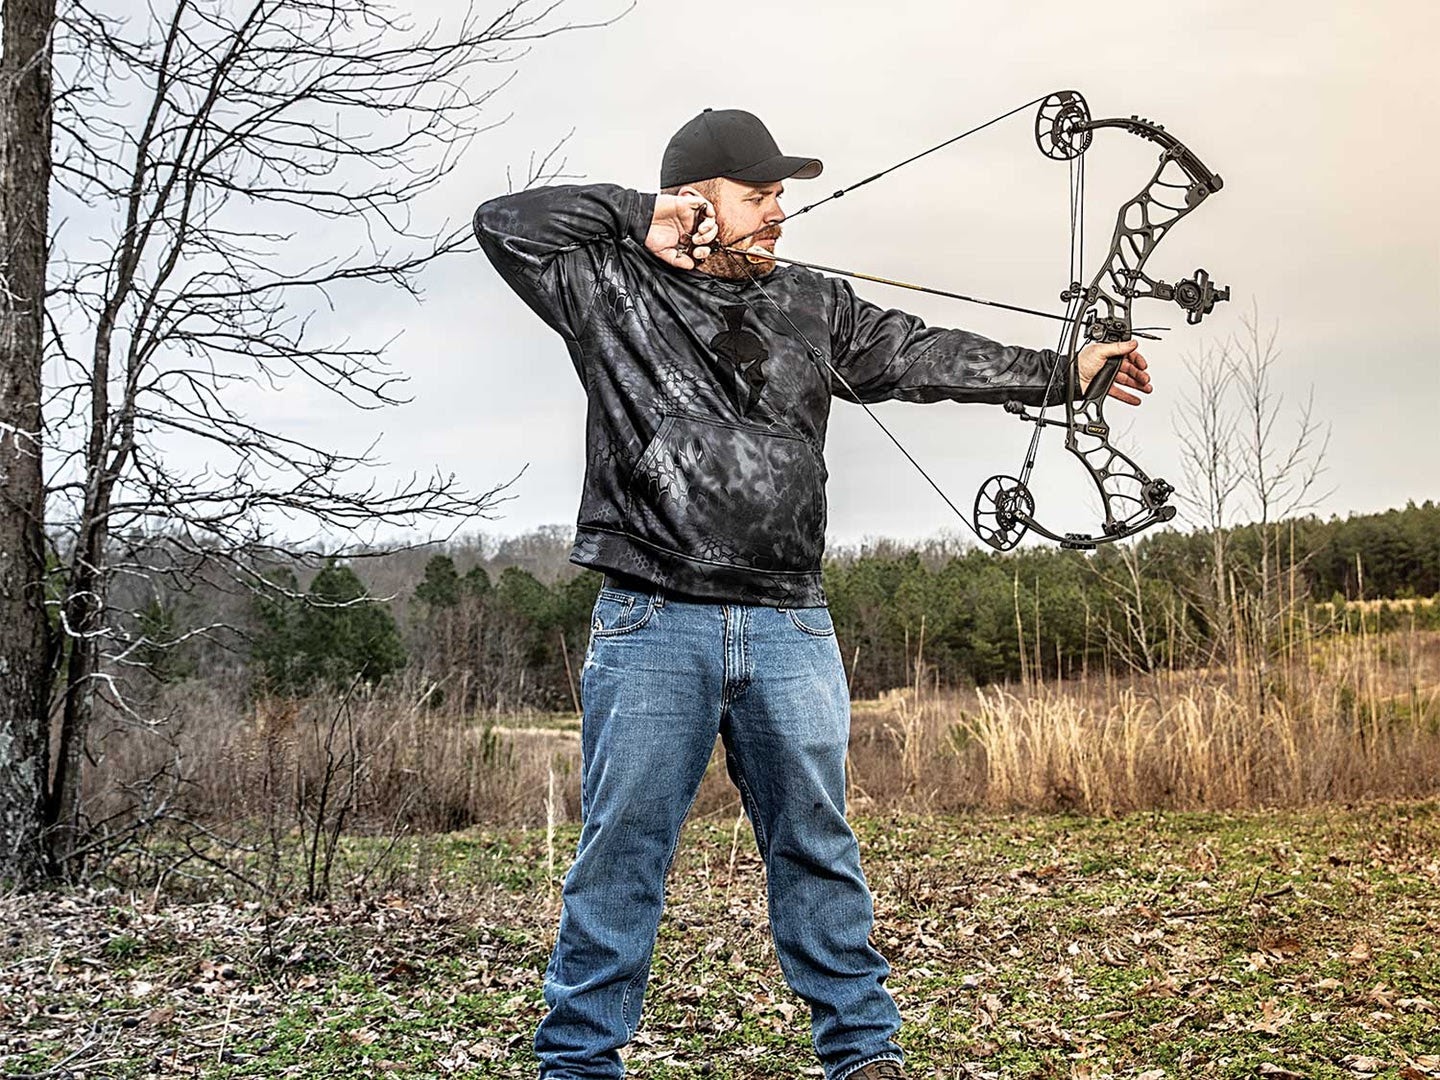 Guy at full draw with a compound bow